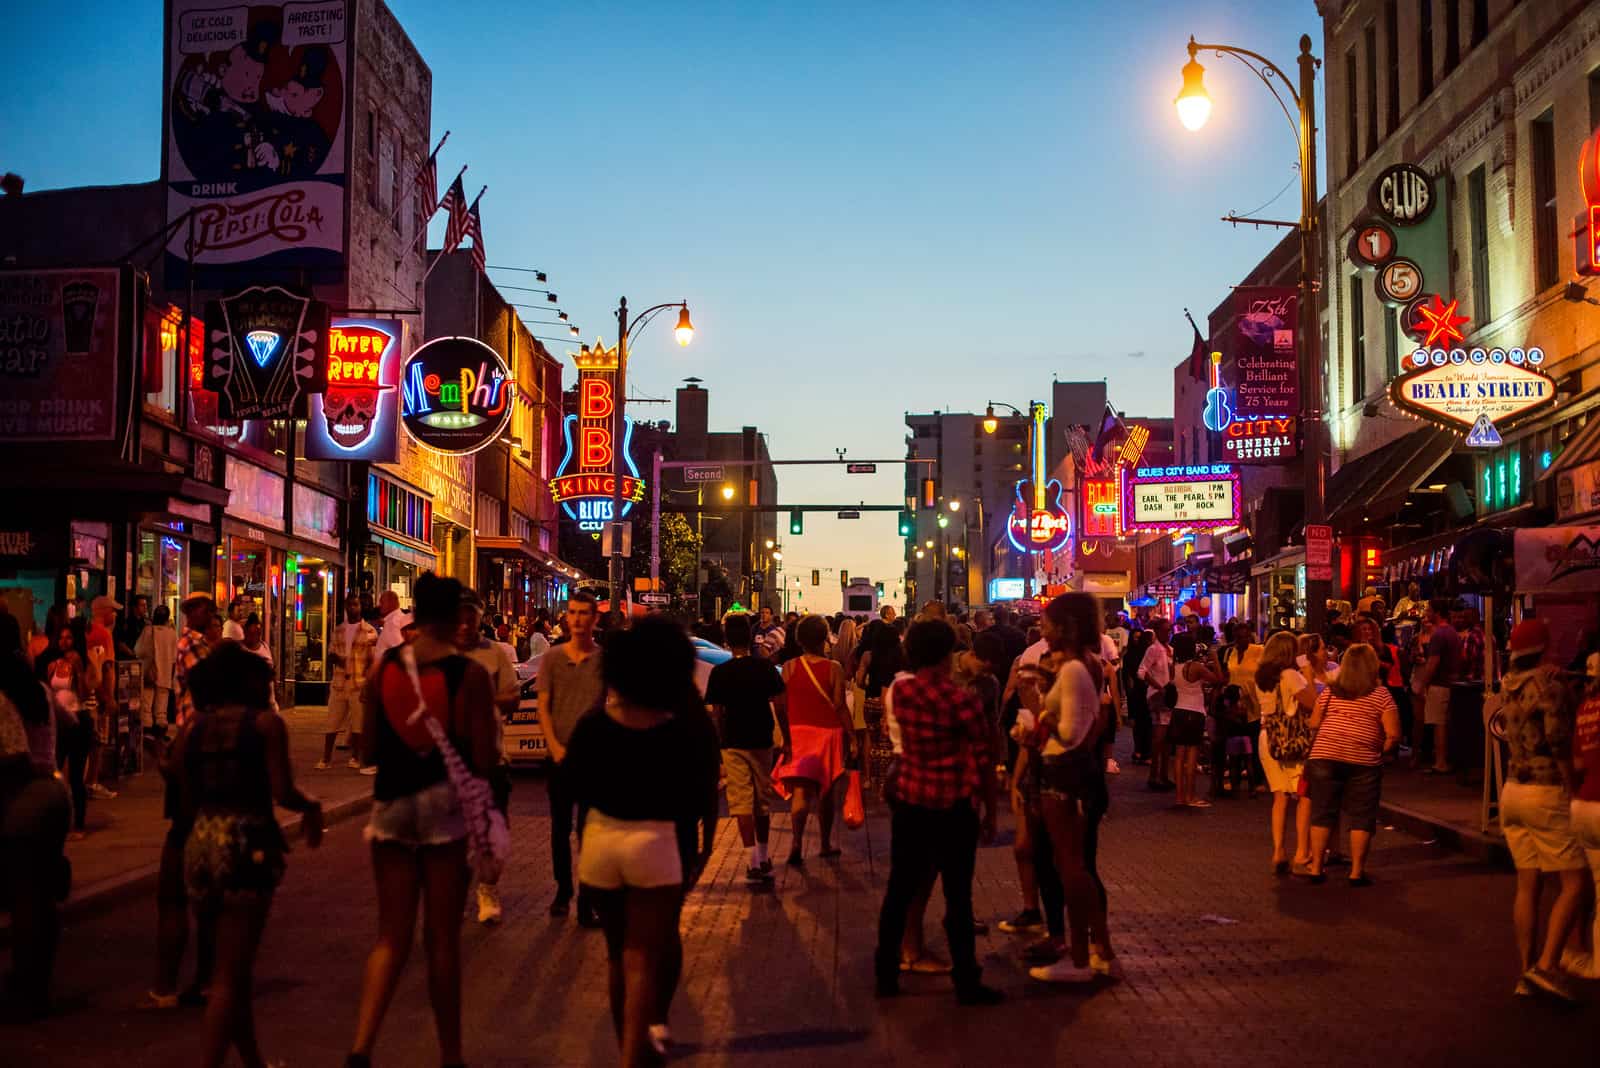 A photo of Beale Street in Memphis.